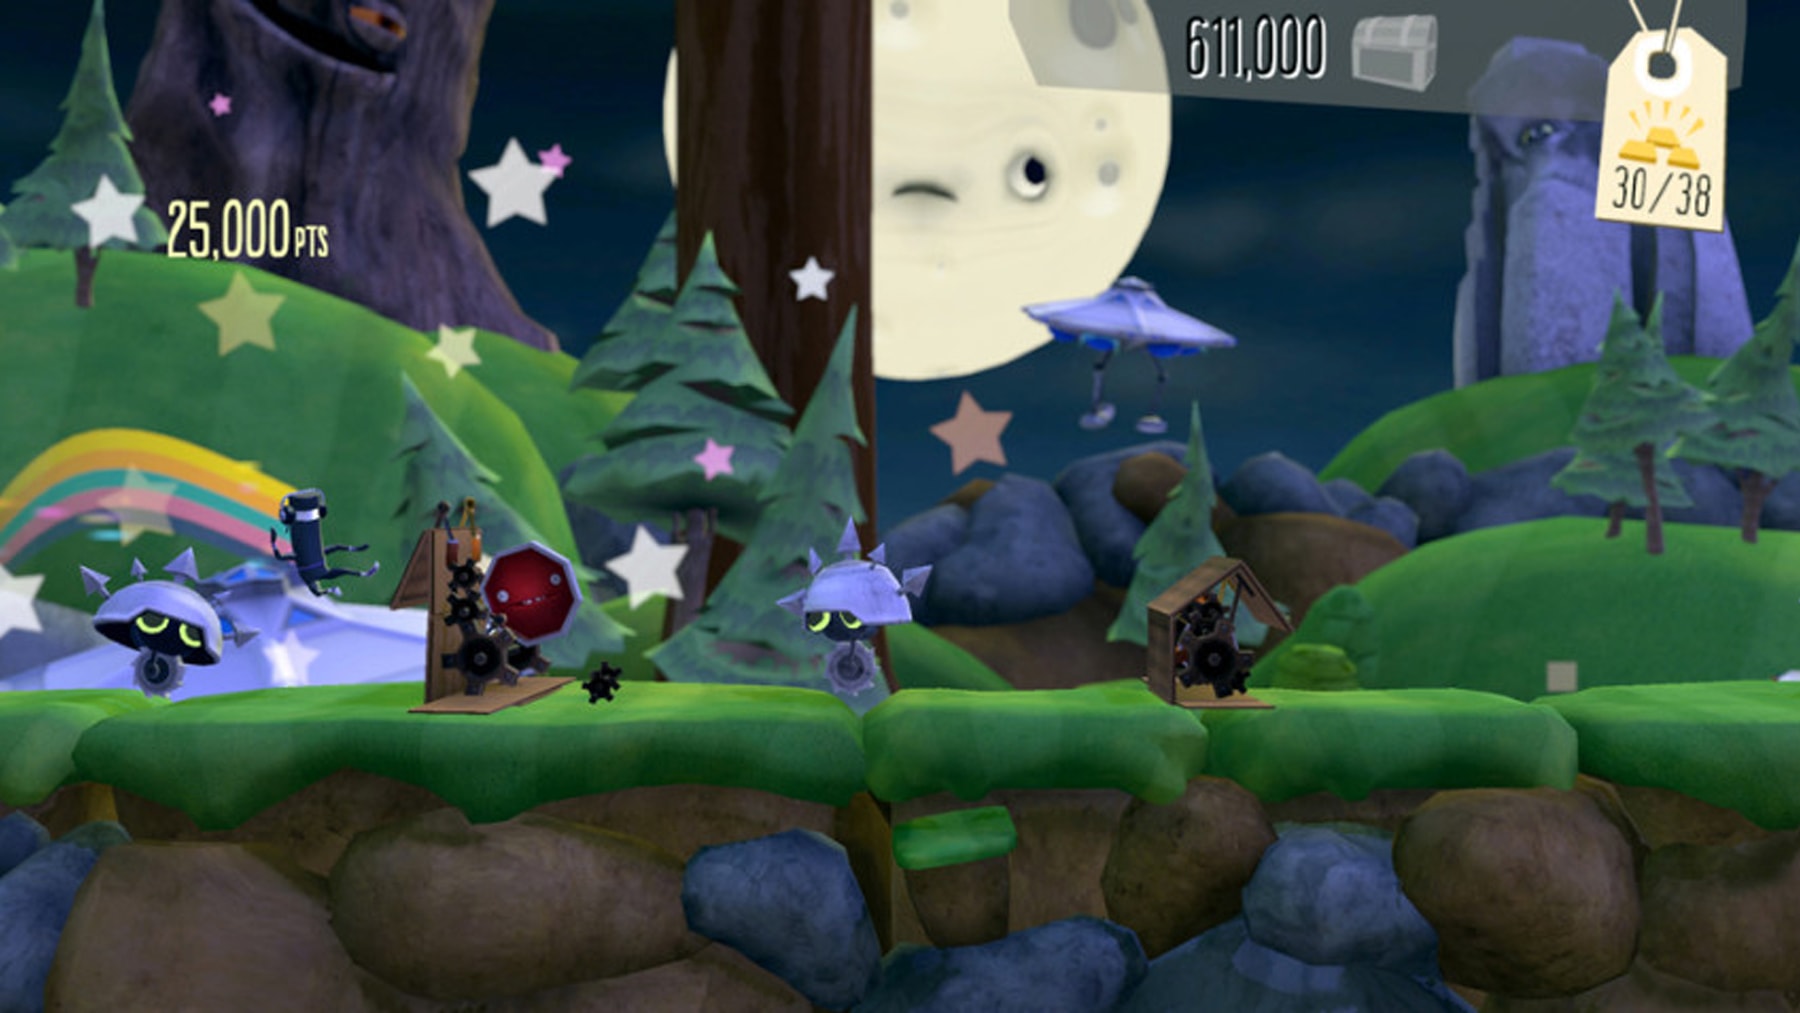 Screenshot of the UFO OMG level from Bit.Trip Runner 2, with a character running through a darkened landscape